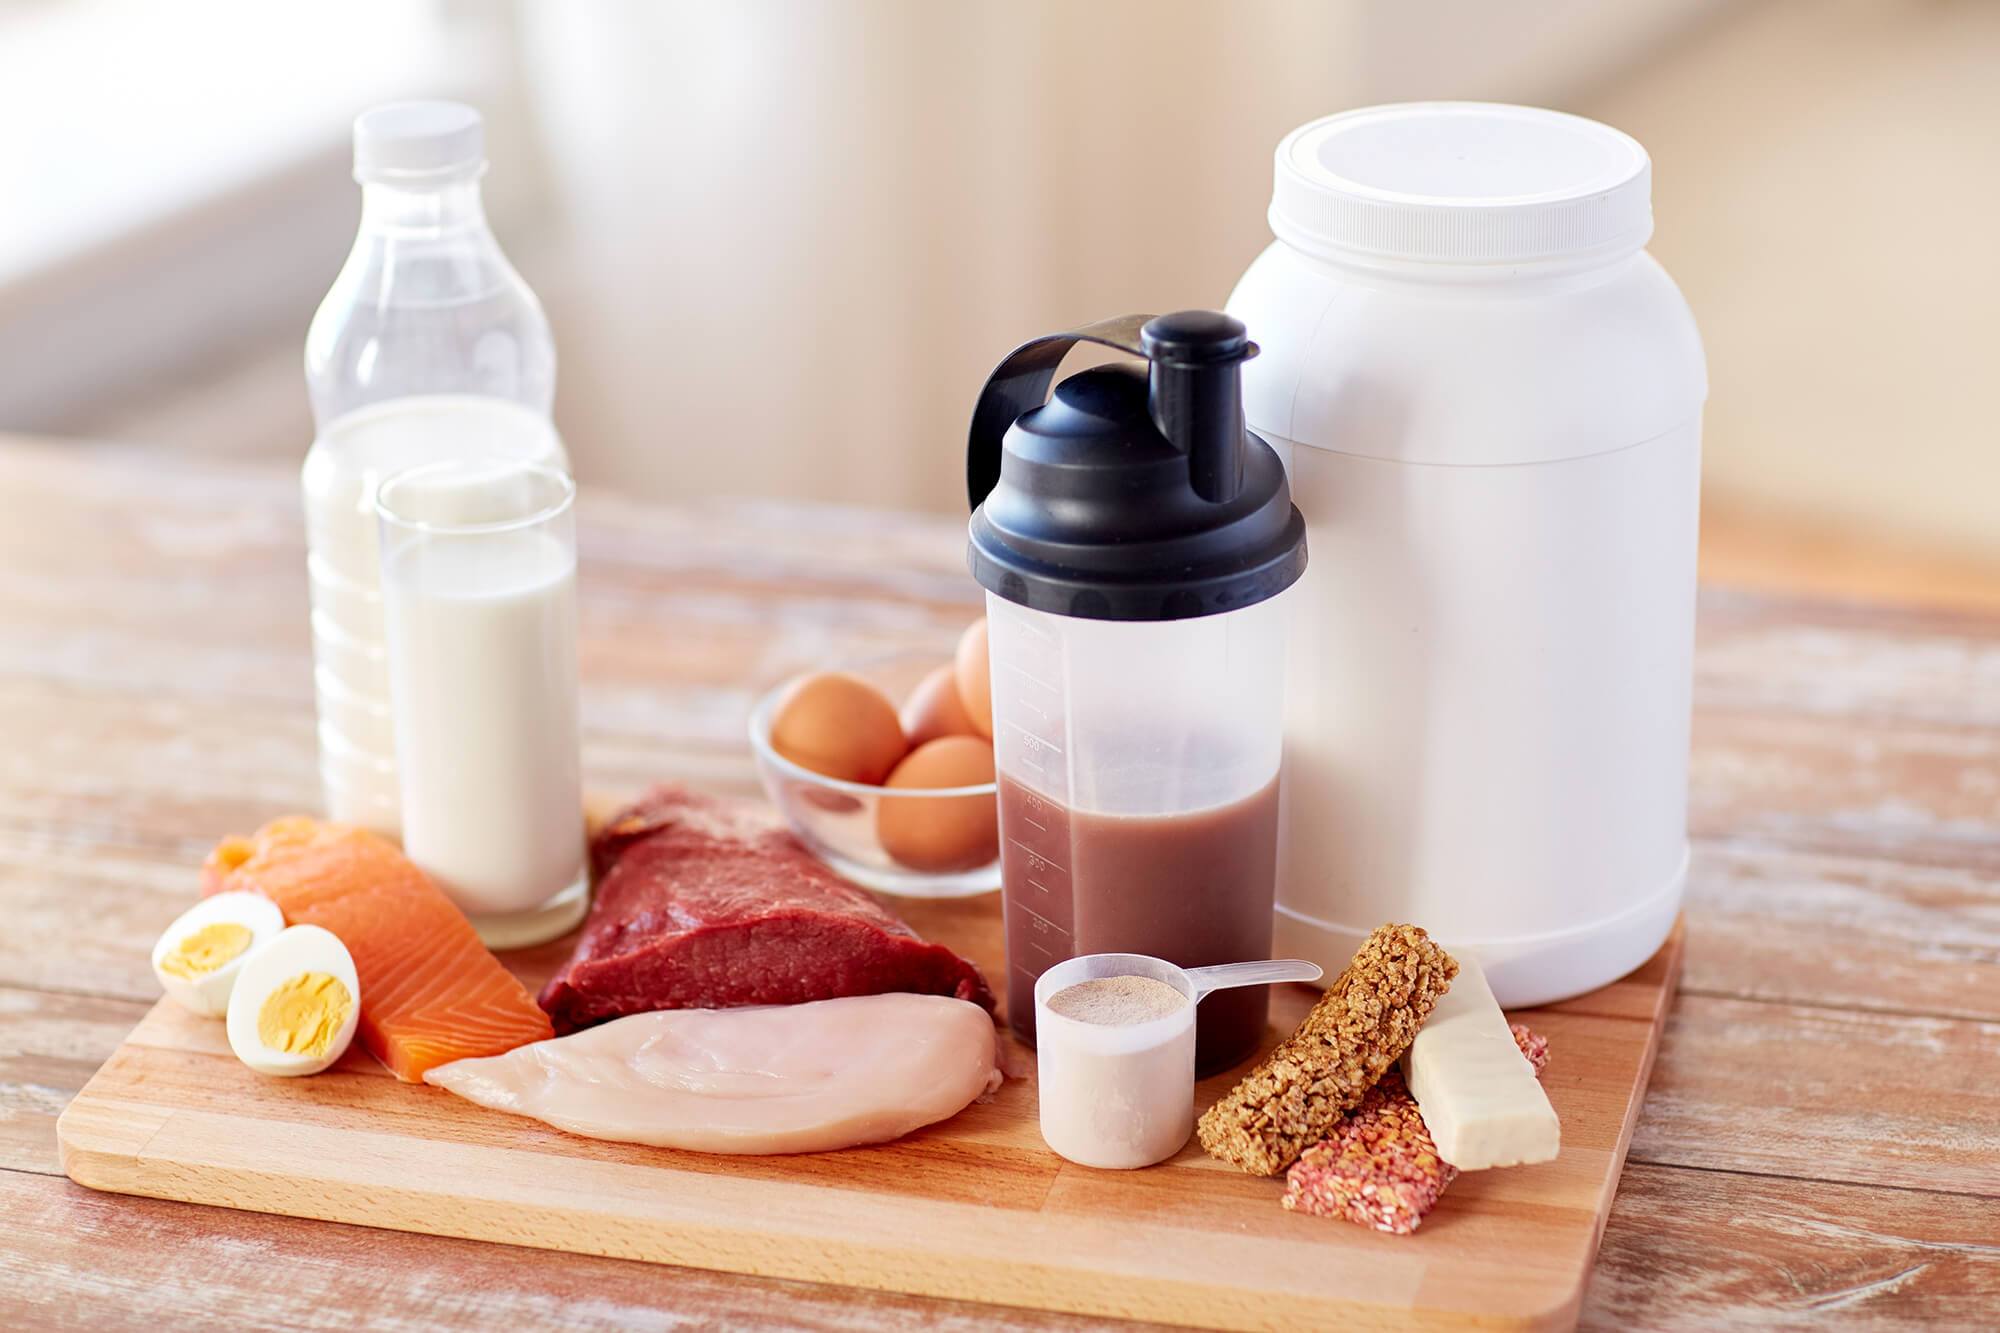 How To Maintain A Balanced High Protein Diet